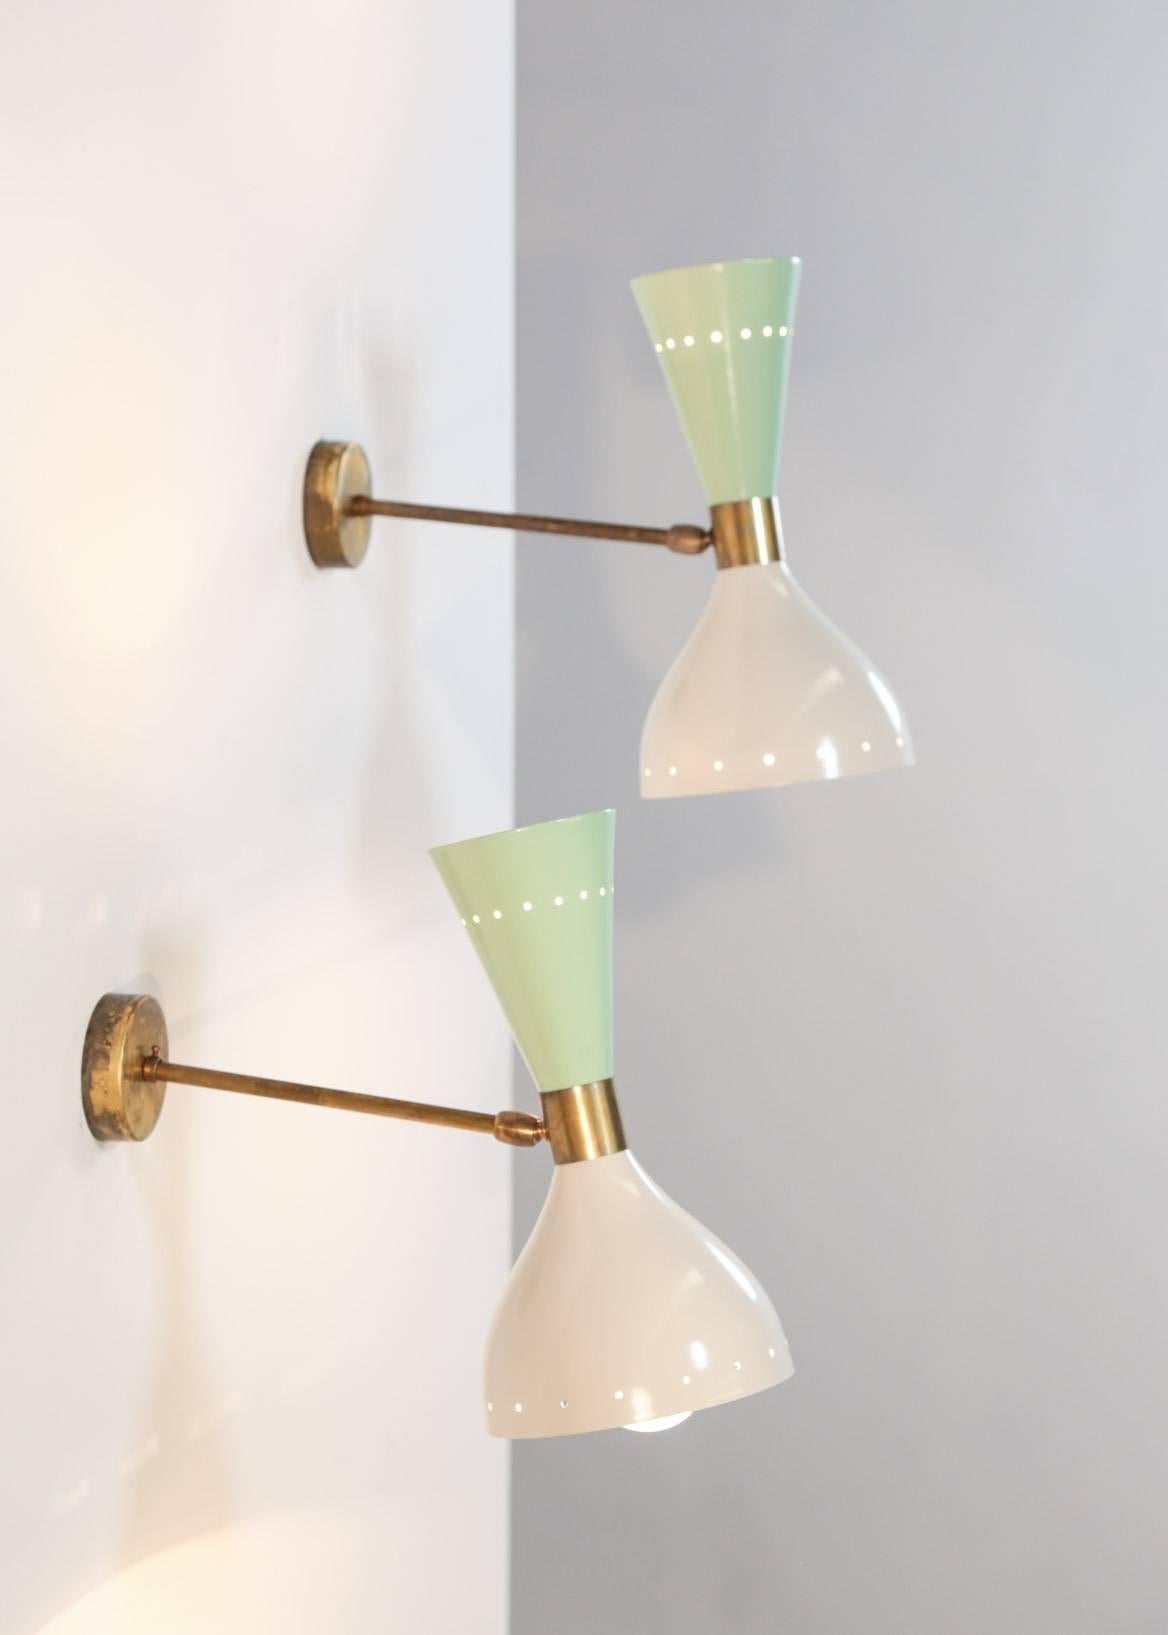 Modern diabolo sconce. The lampshades are adjustable and can light in different directions.
Two bulbs per lampshade.
Excellent condition, beautiful sculptural and decorative wall light style Stilnovo.